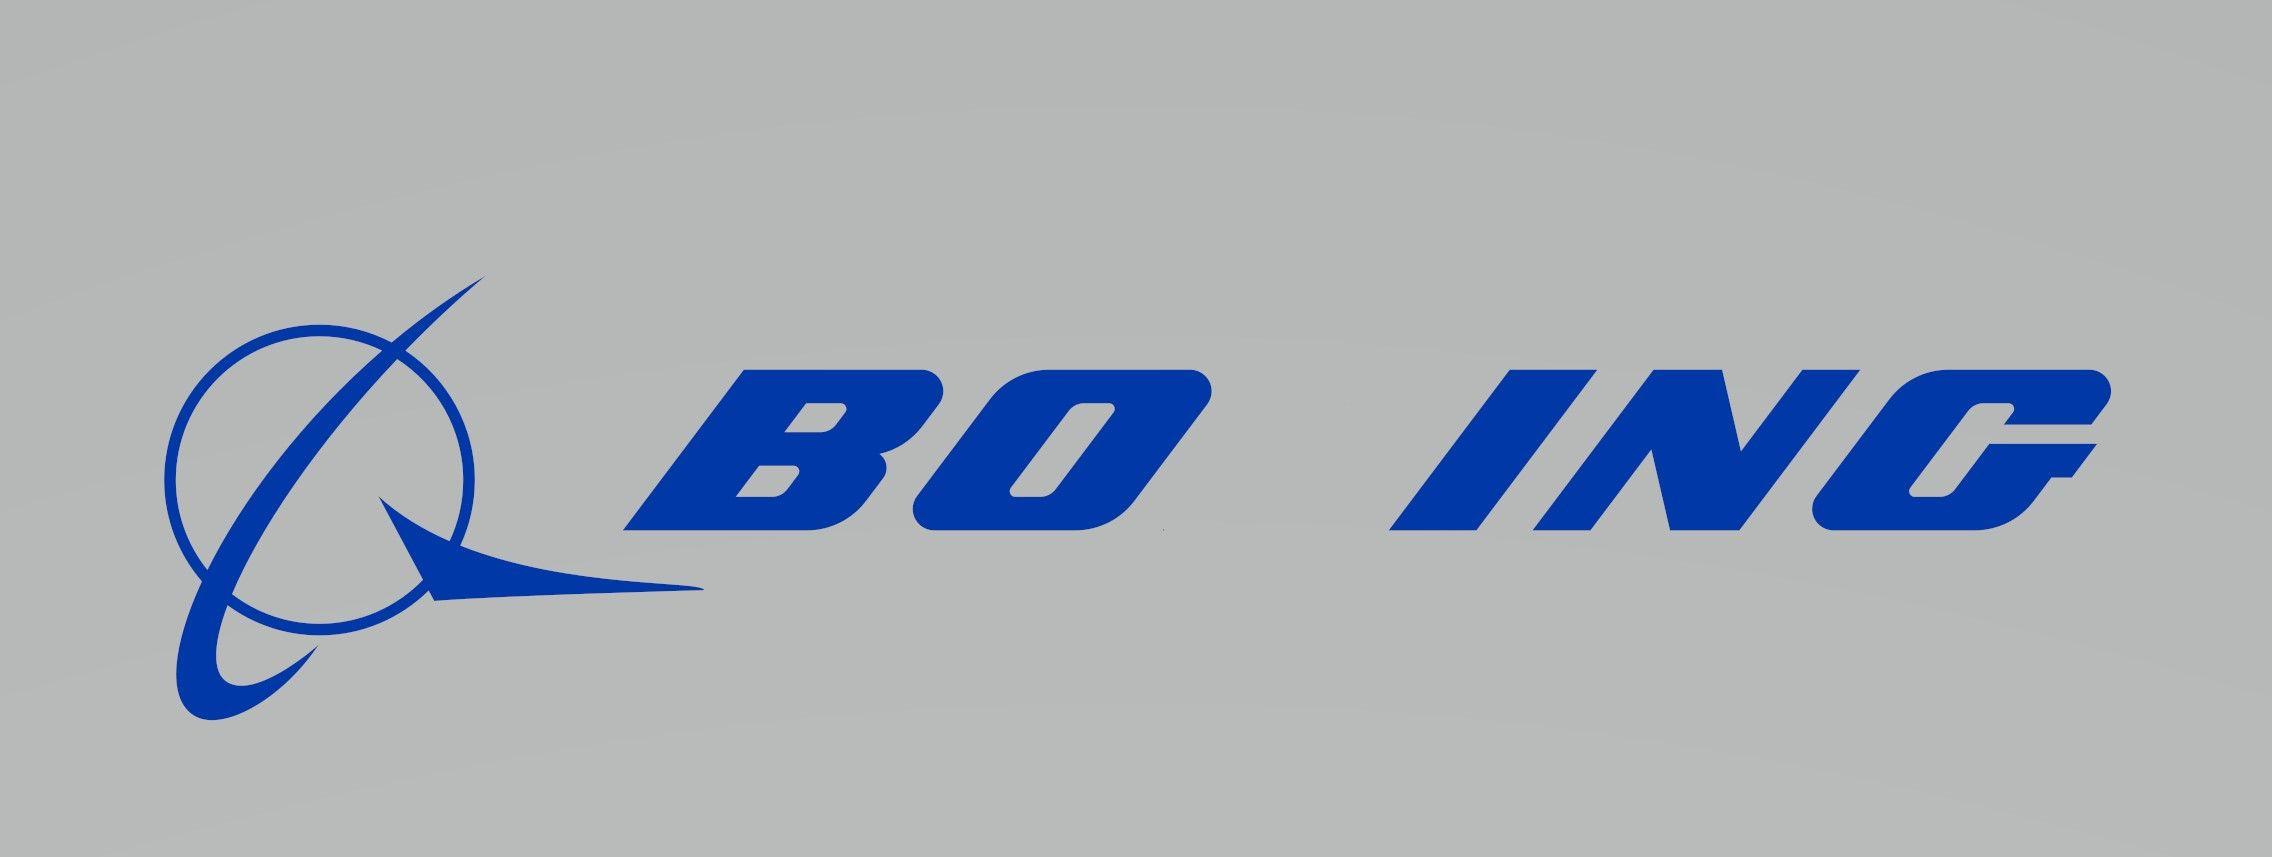 Boeing's Logo - Rare discovery of Boeing's new Logo!